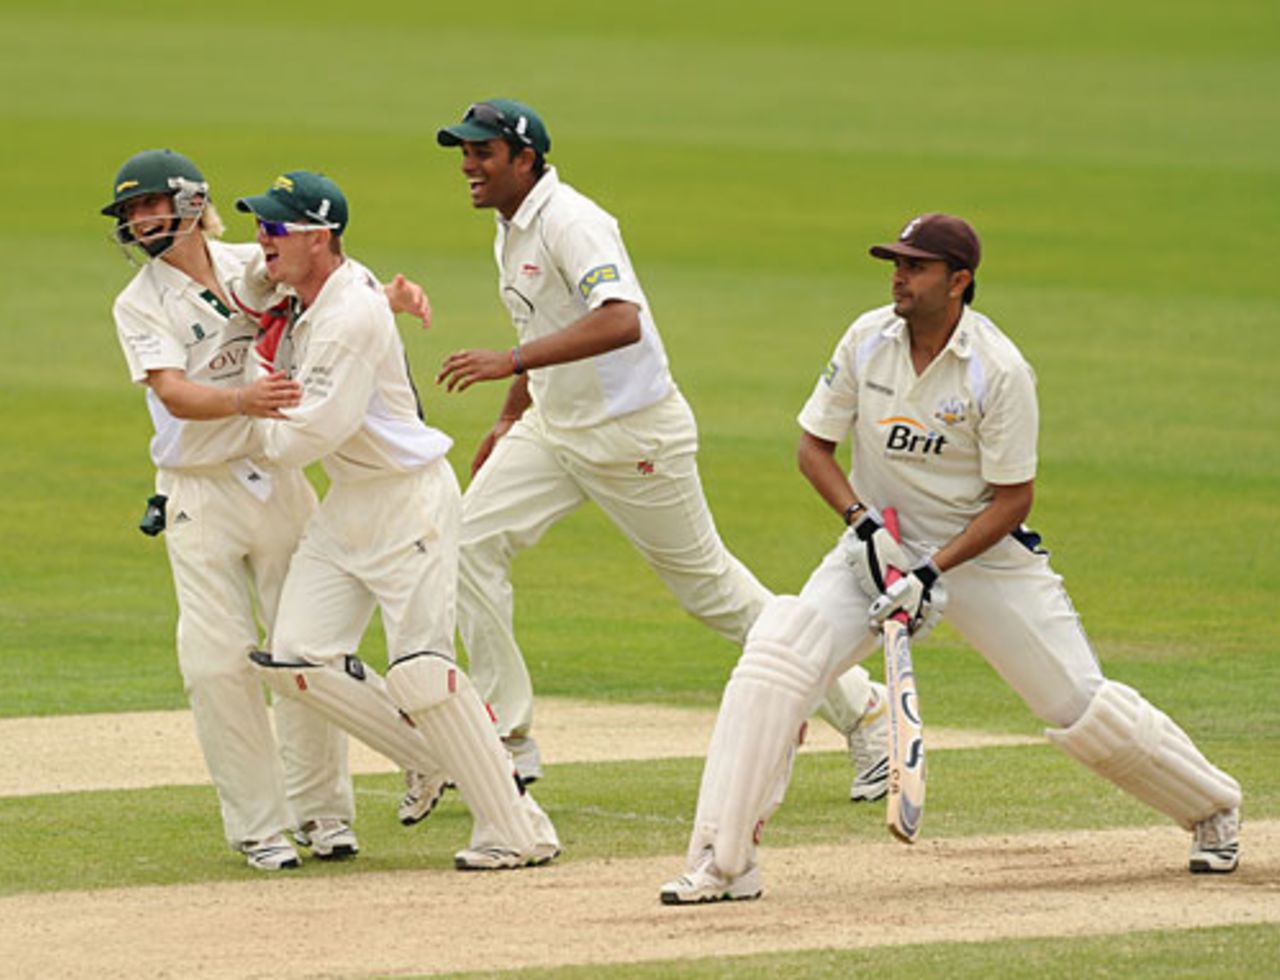 Leicestershire celebrate the dismissal of Usman Afzaal as Surrey slumped towards defeat, Surrey v Leicestershire, County Championship Division Two, The Oval, June 6, 2010